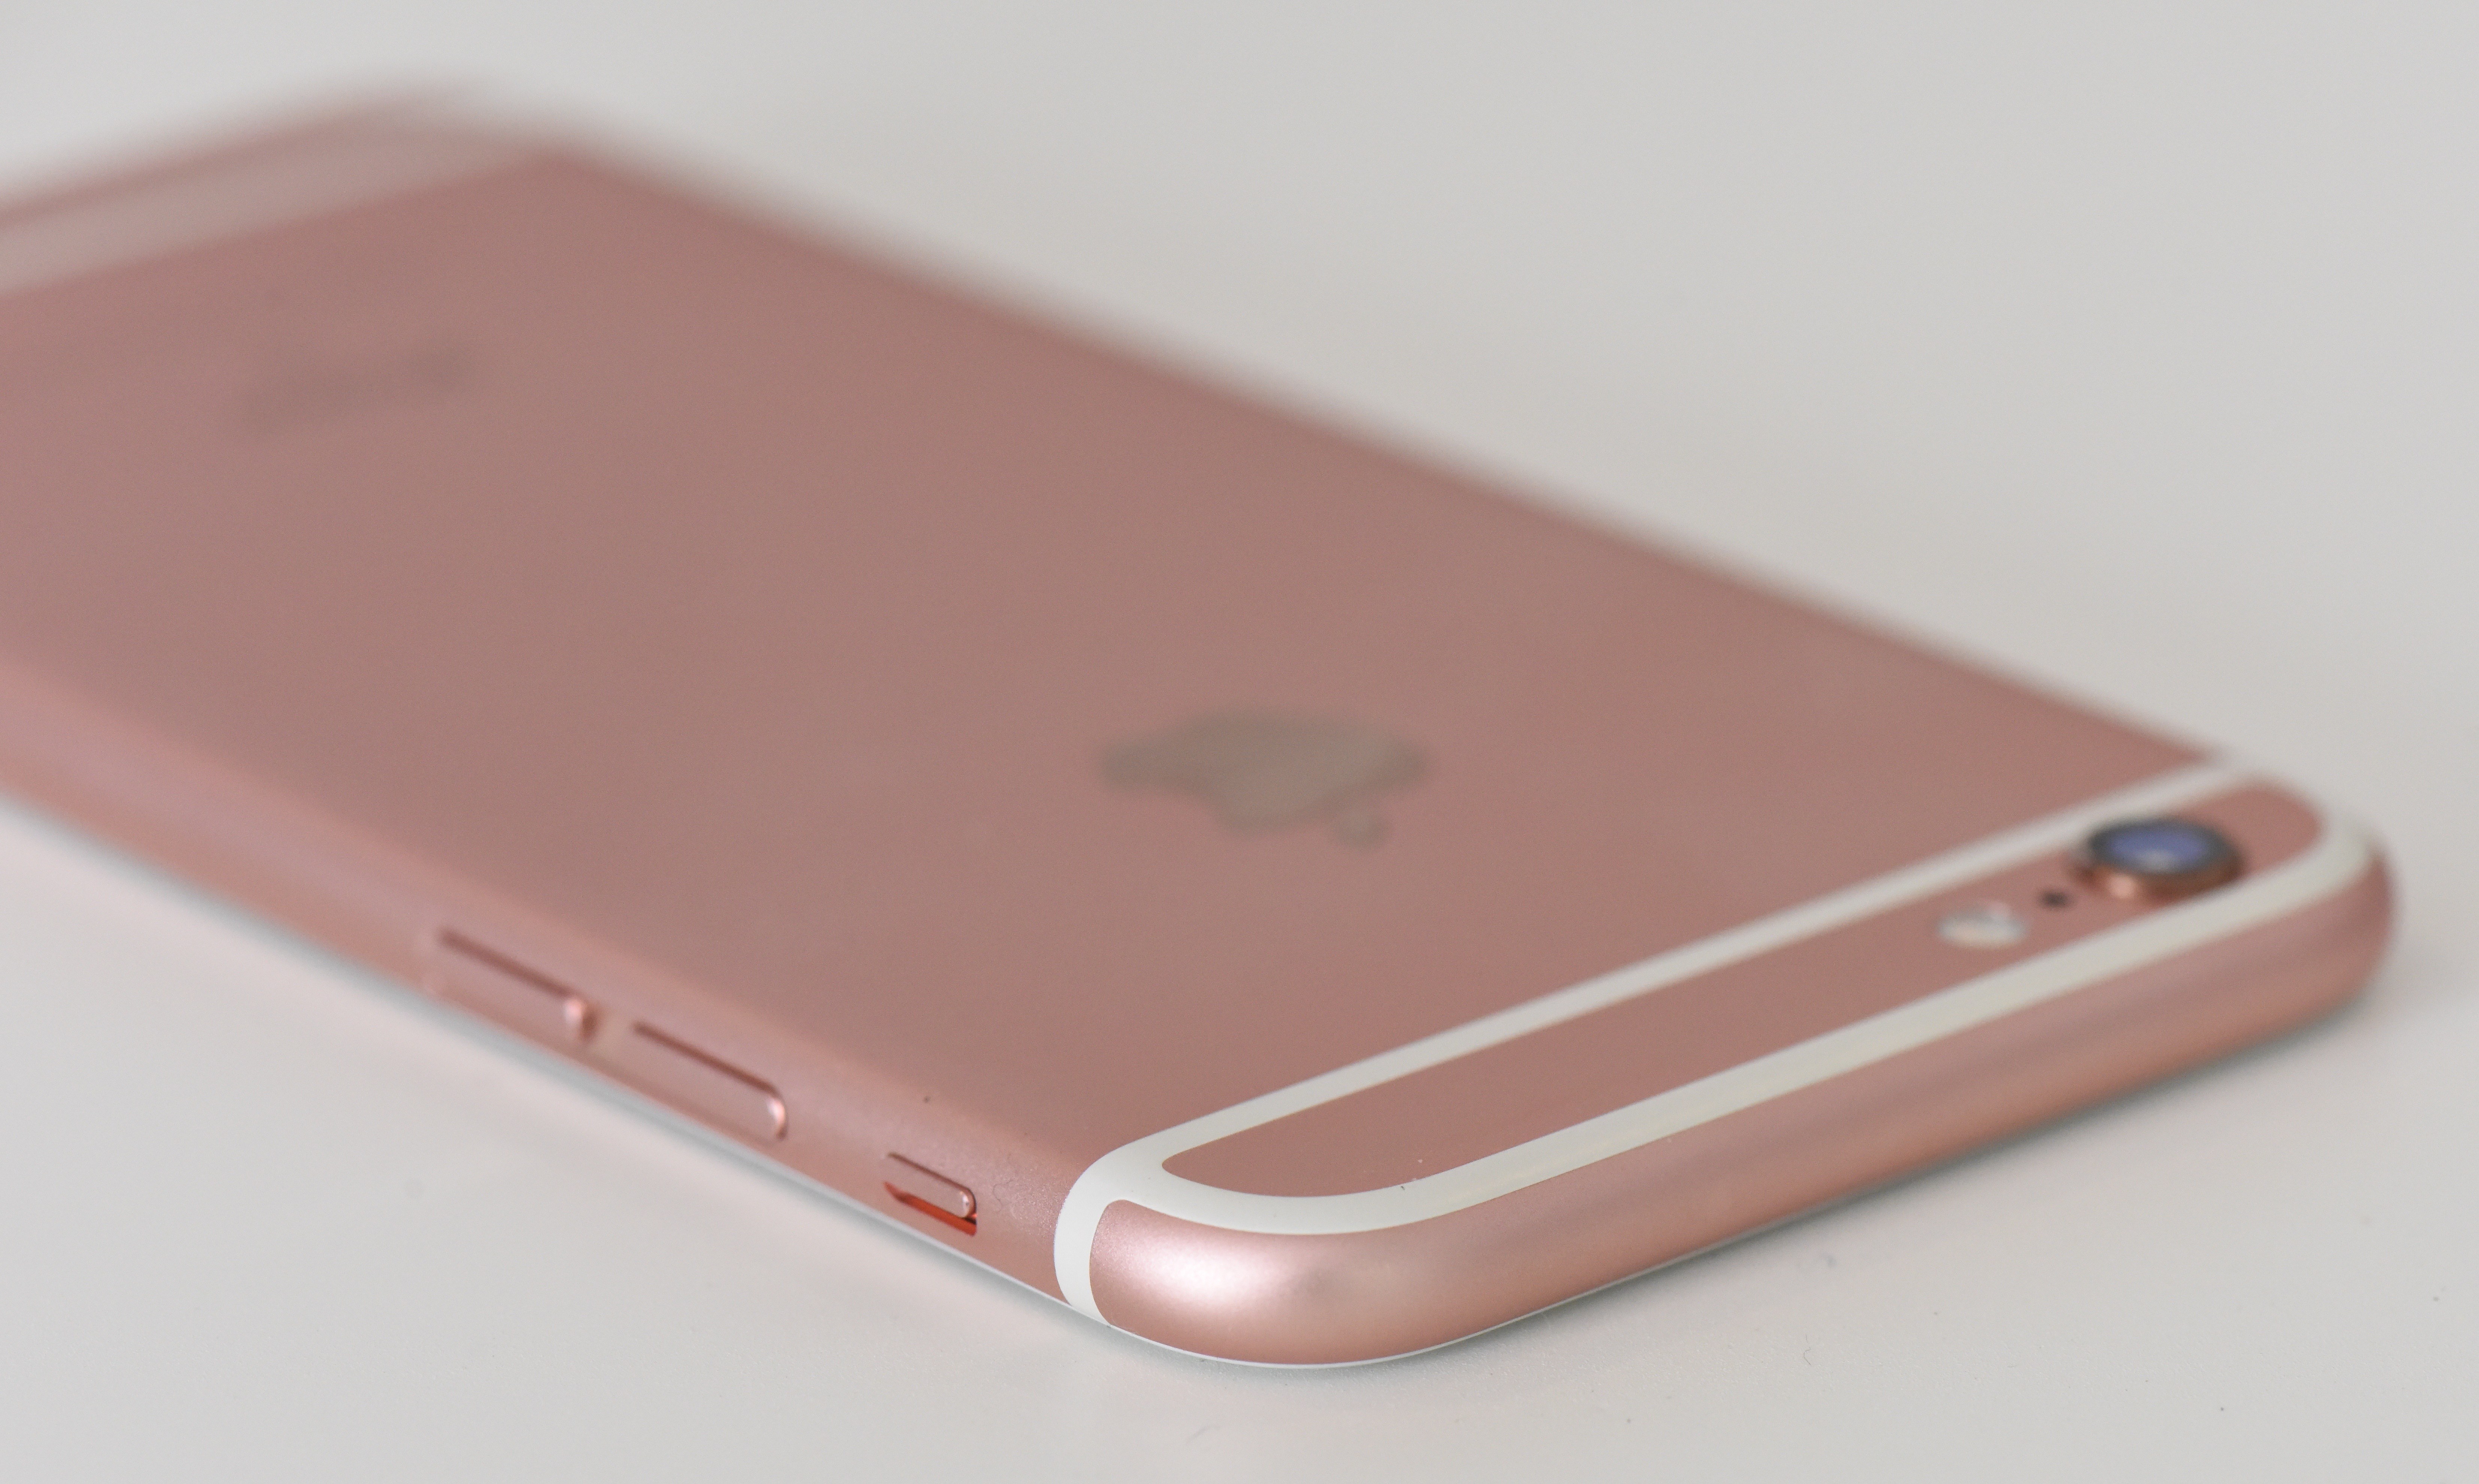 How to Find the Rose Gold iPhone 6s in Stock